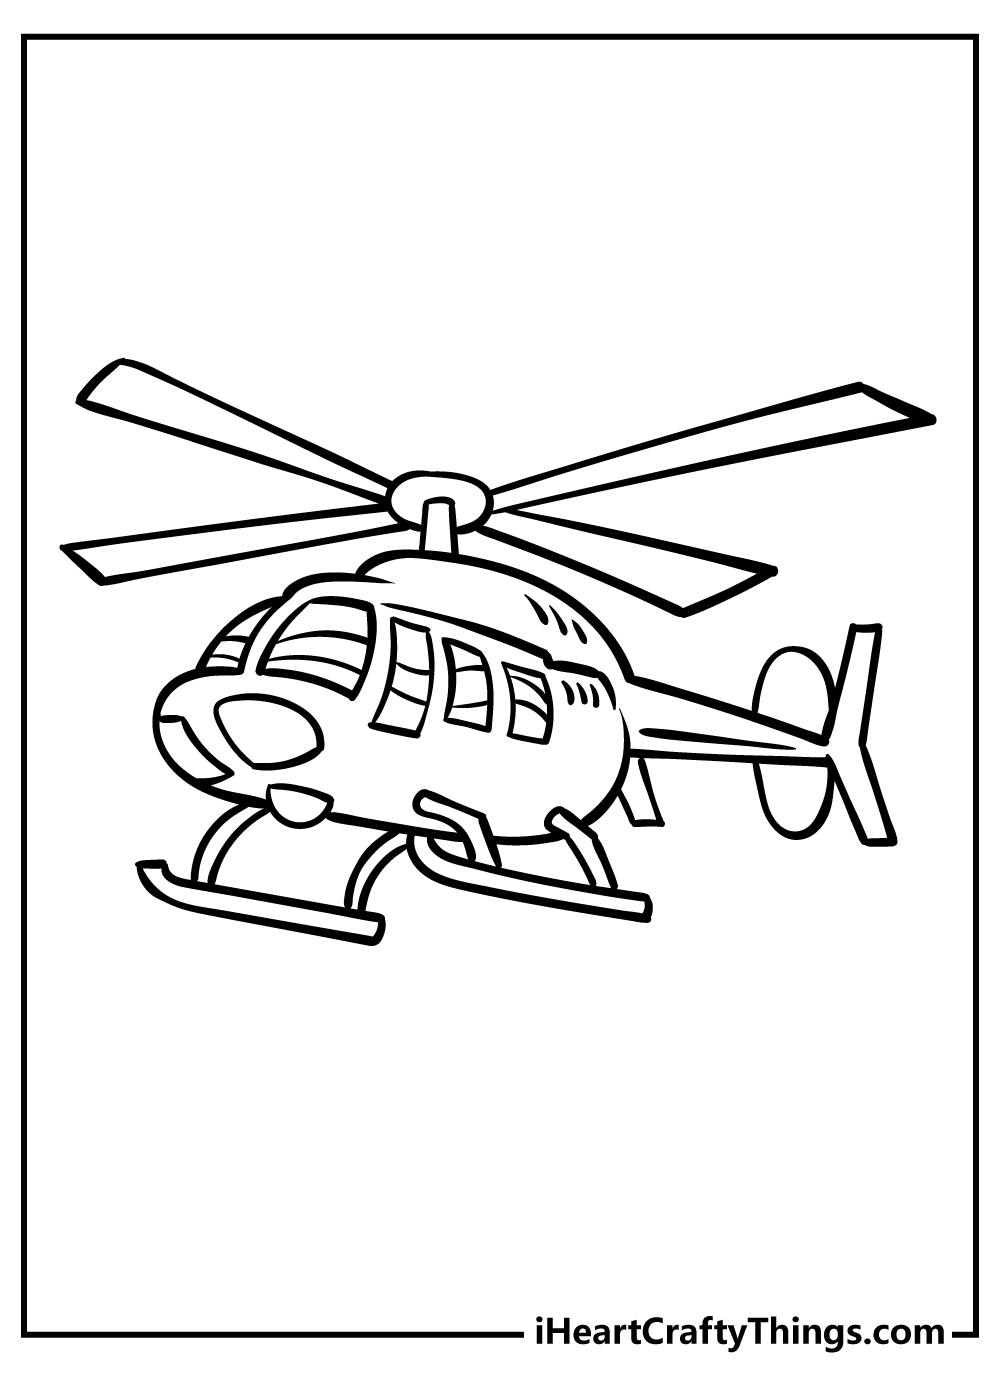 Printable Helicopter Coloring Pages Updated 20